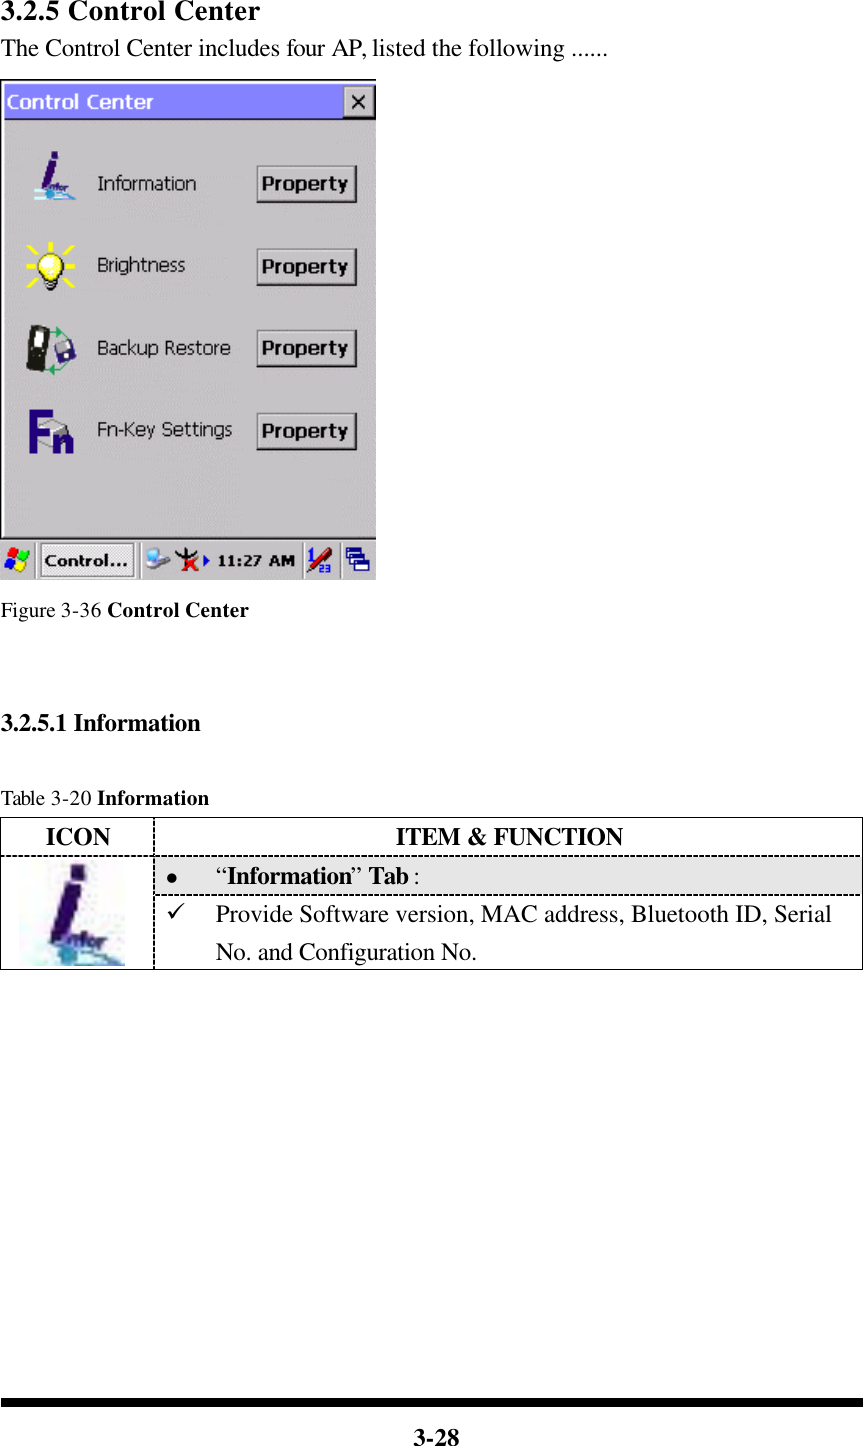  3-28   3.2.5 Control Center The Control Center includes four AP, listed the following ......  Figure 3-36 Control Center   3.2.5.1 Information  Table 3-20 Information ICON ITEM &amp; FUNCTION l “Information” Tab :    ü Provide Software version, MAC address, Bluetooth ID, Serial No. and Configuration No.           